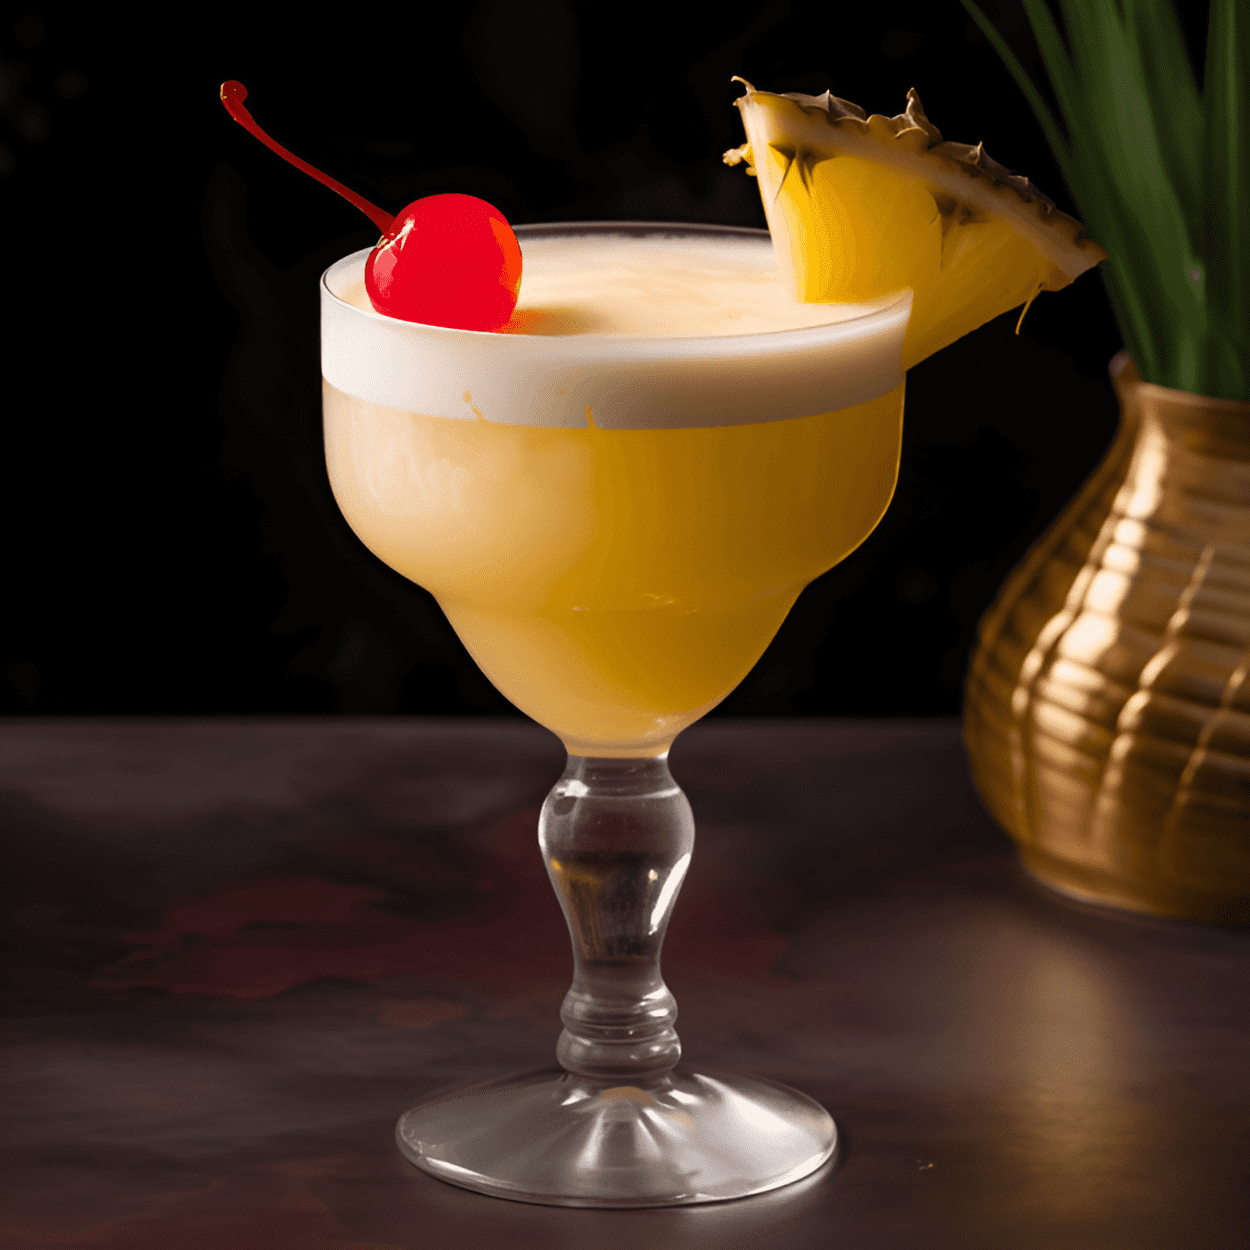 Rum Relaxer Cocktail Recipe - The Rum Relaxer is a sweet and creamy cocktail with a tropical twist. The rum gives it a warm, rich flavor, while the pineapple juice adds a tangy sweetness. The coconut cream adds a creamy, velvety texture that balances out the tanginess of the pineapple and the strength of the rum.